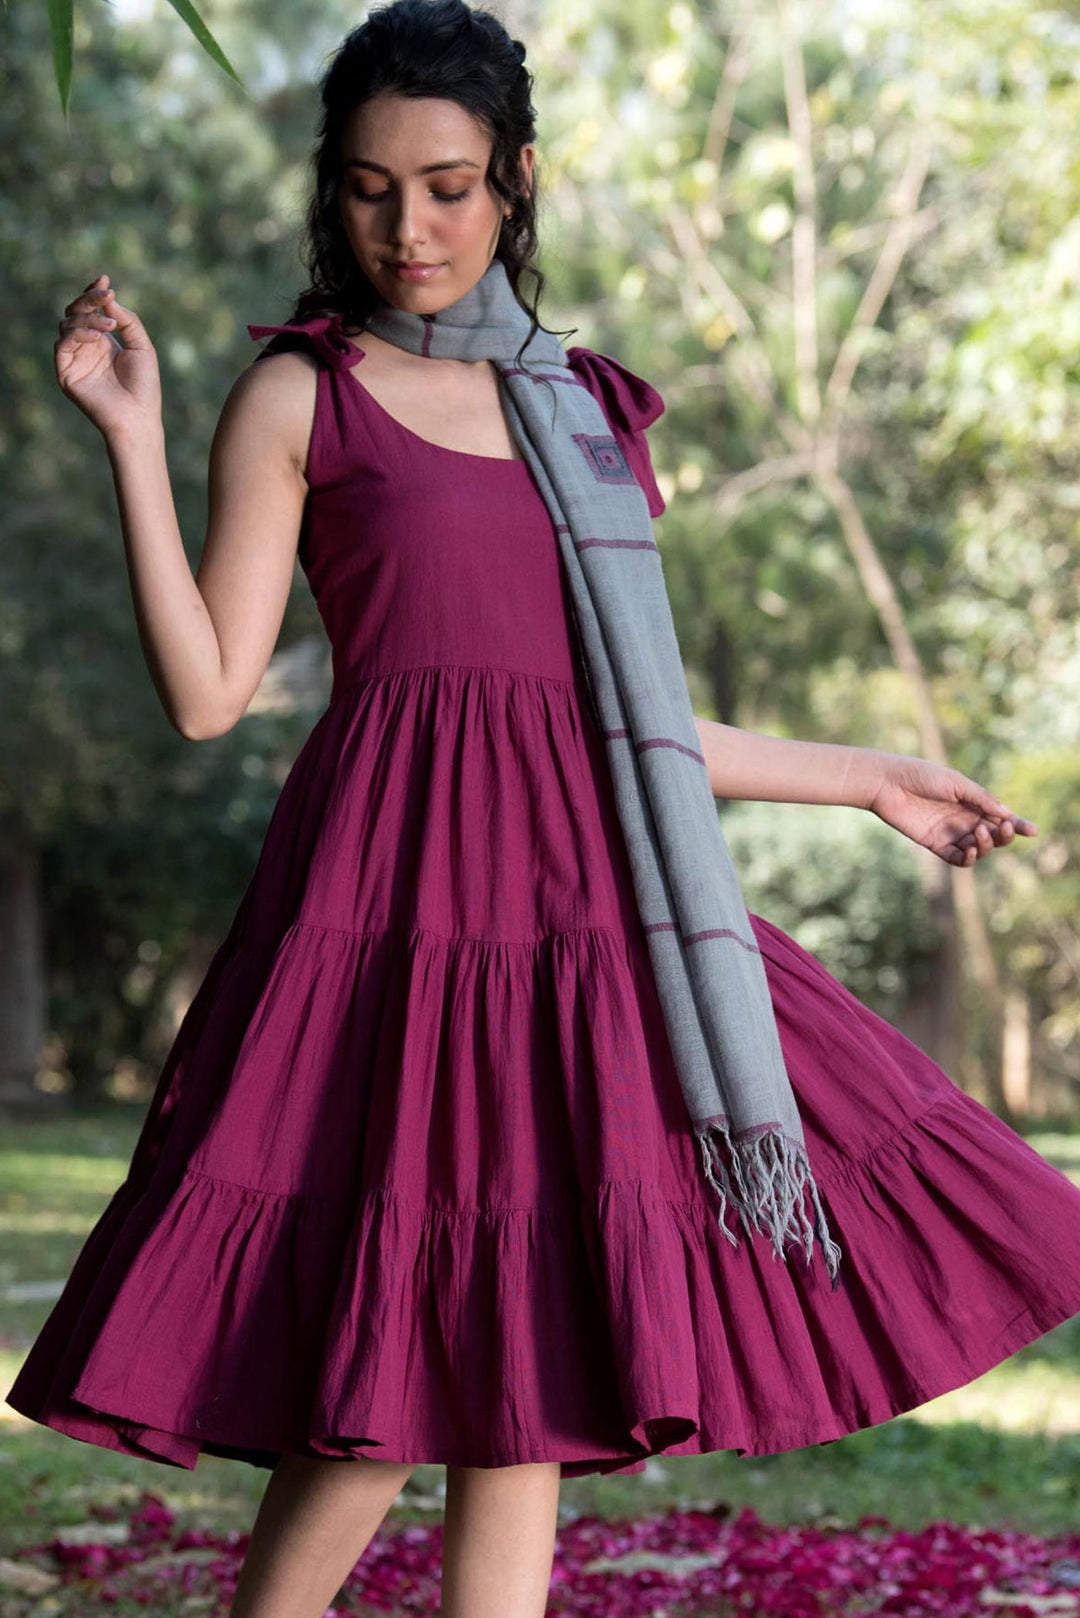 Maroon Cotton Dress with Tie-up Shoulder | Asami Cotton Dress - Maroon